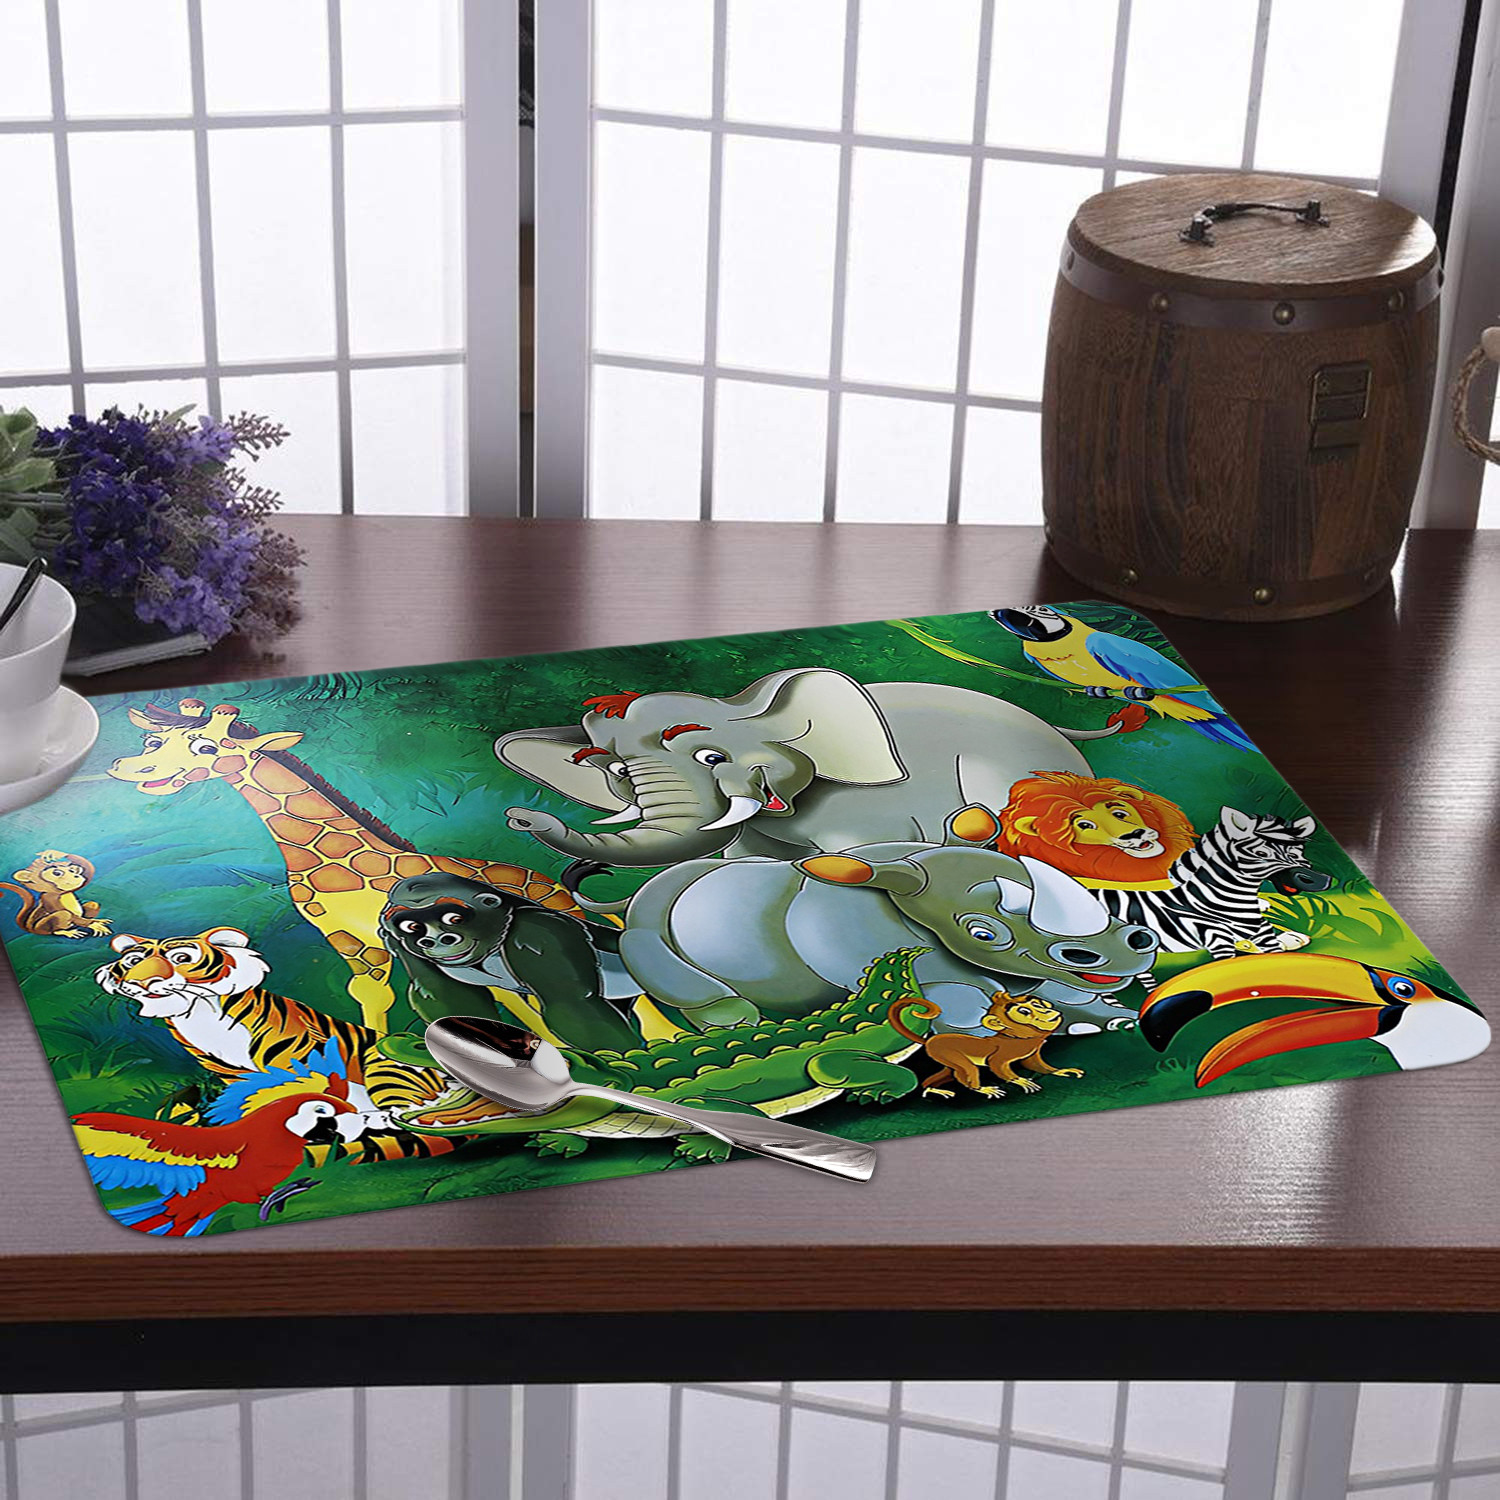 Kuber Industries Dining Table Mat | PVC Jungle Print | Table Mat | Placemats for Kitchen | Refrigerator Liners Mats | Shelf Liner Mat | Set of 6 | Green